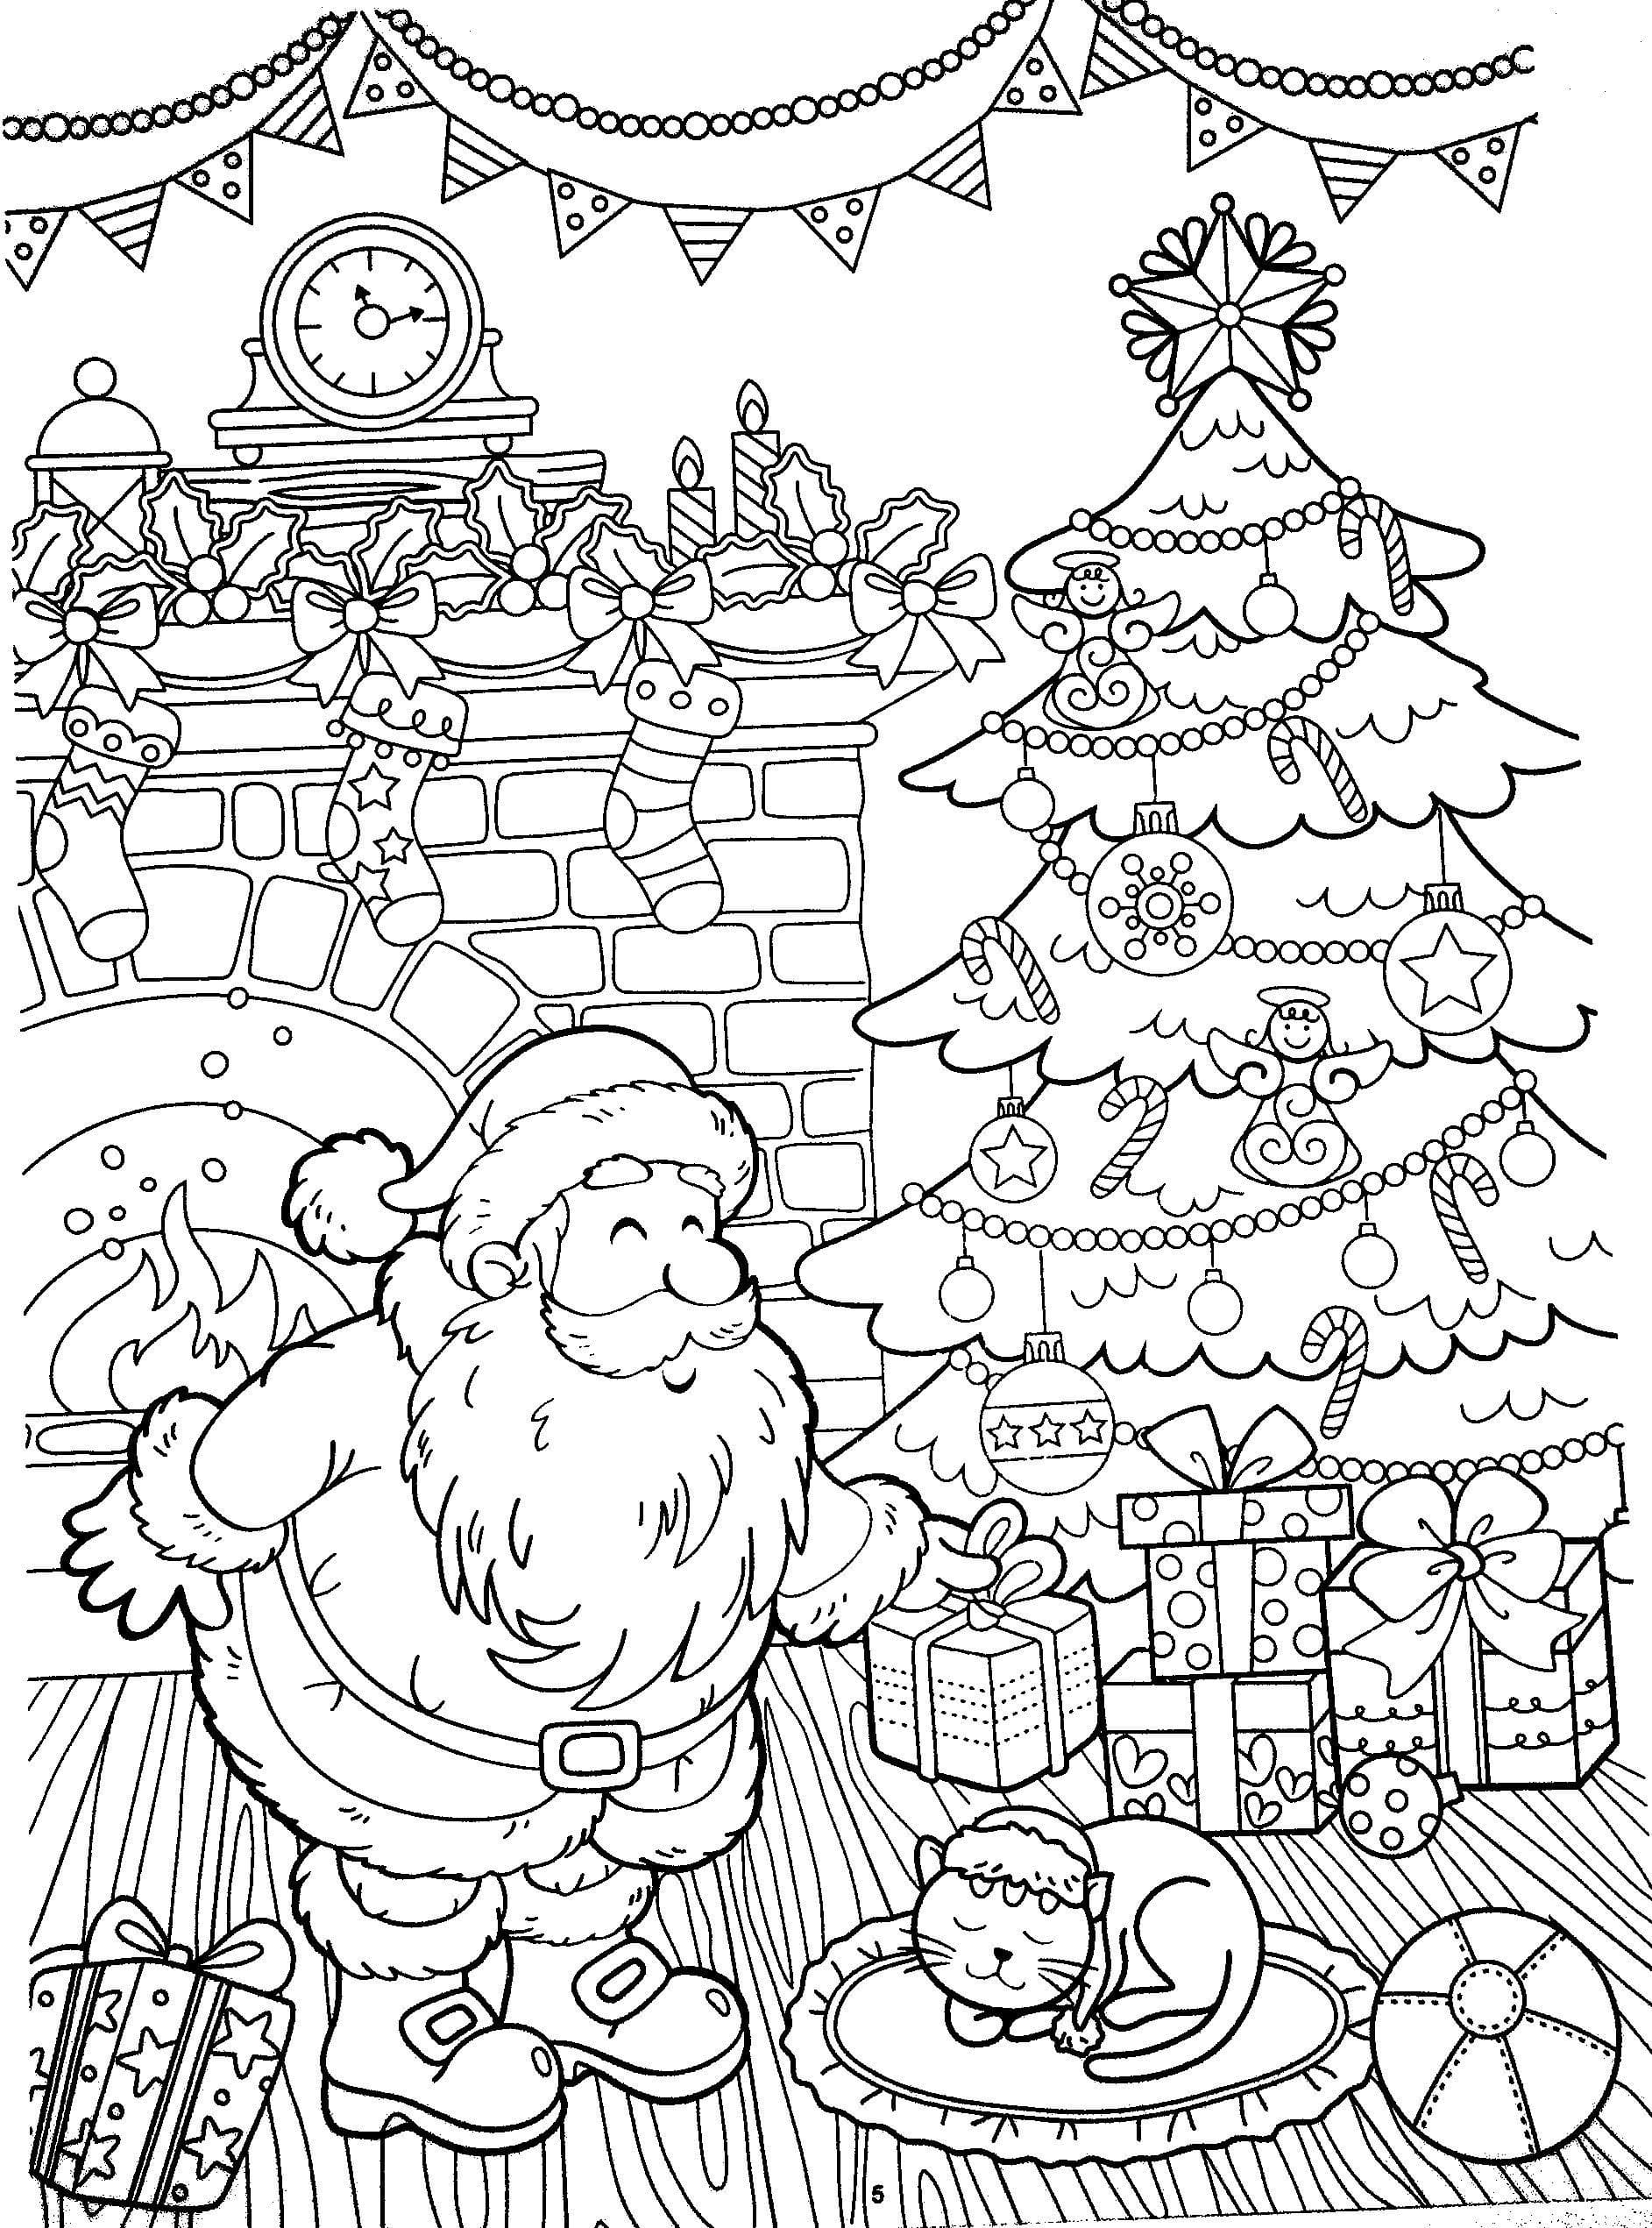 Kind Santa Claus Takes Care Of His Cat Coloring Page